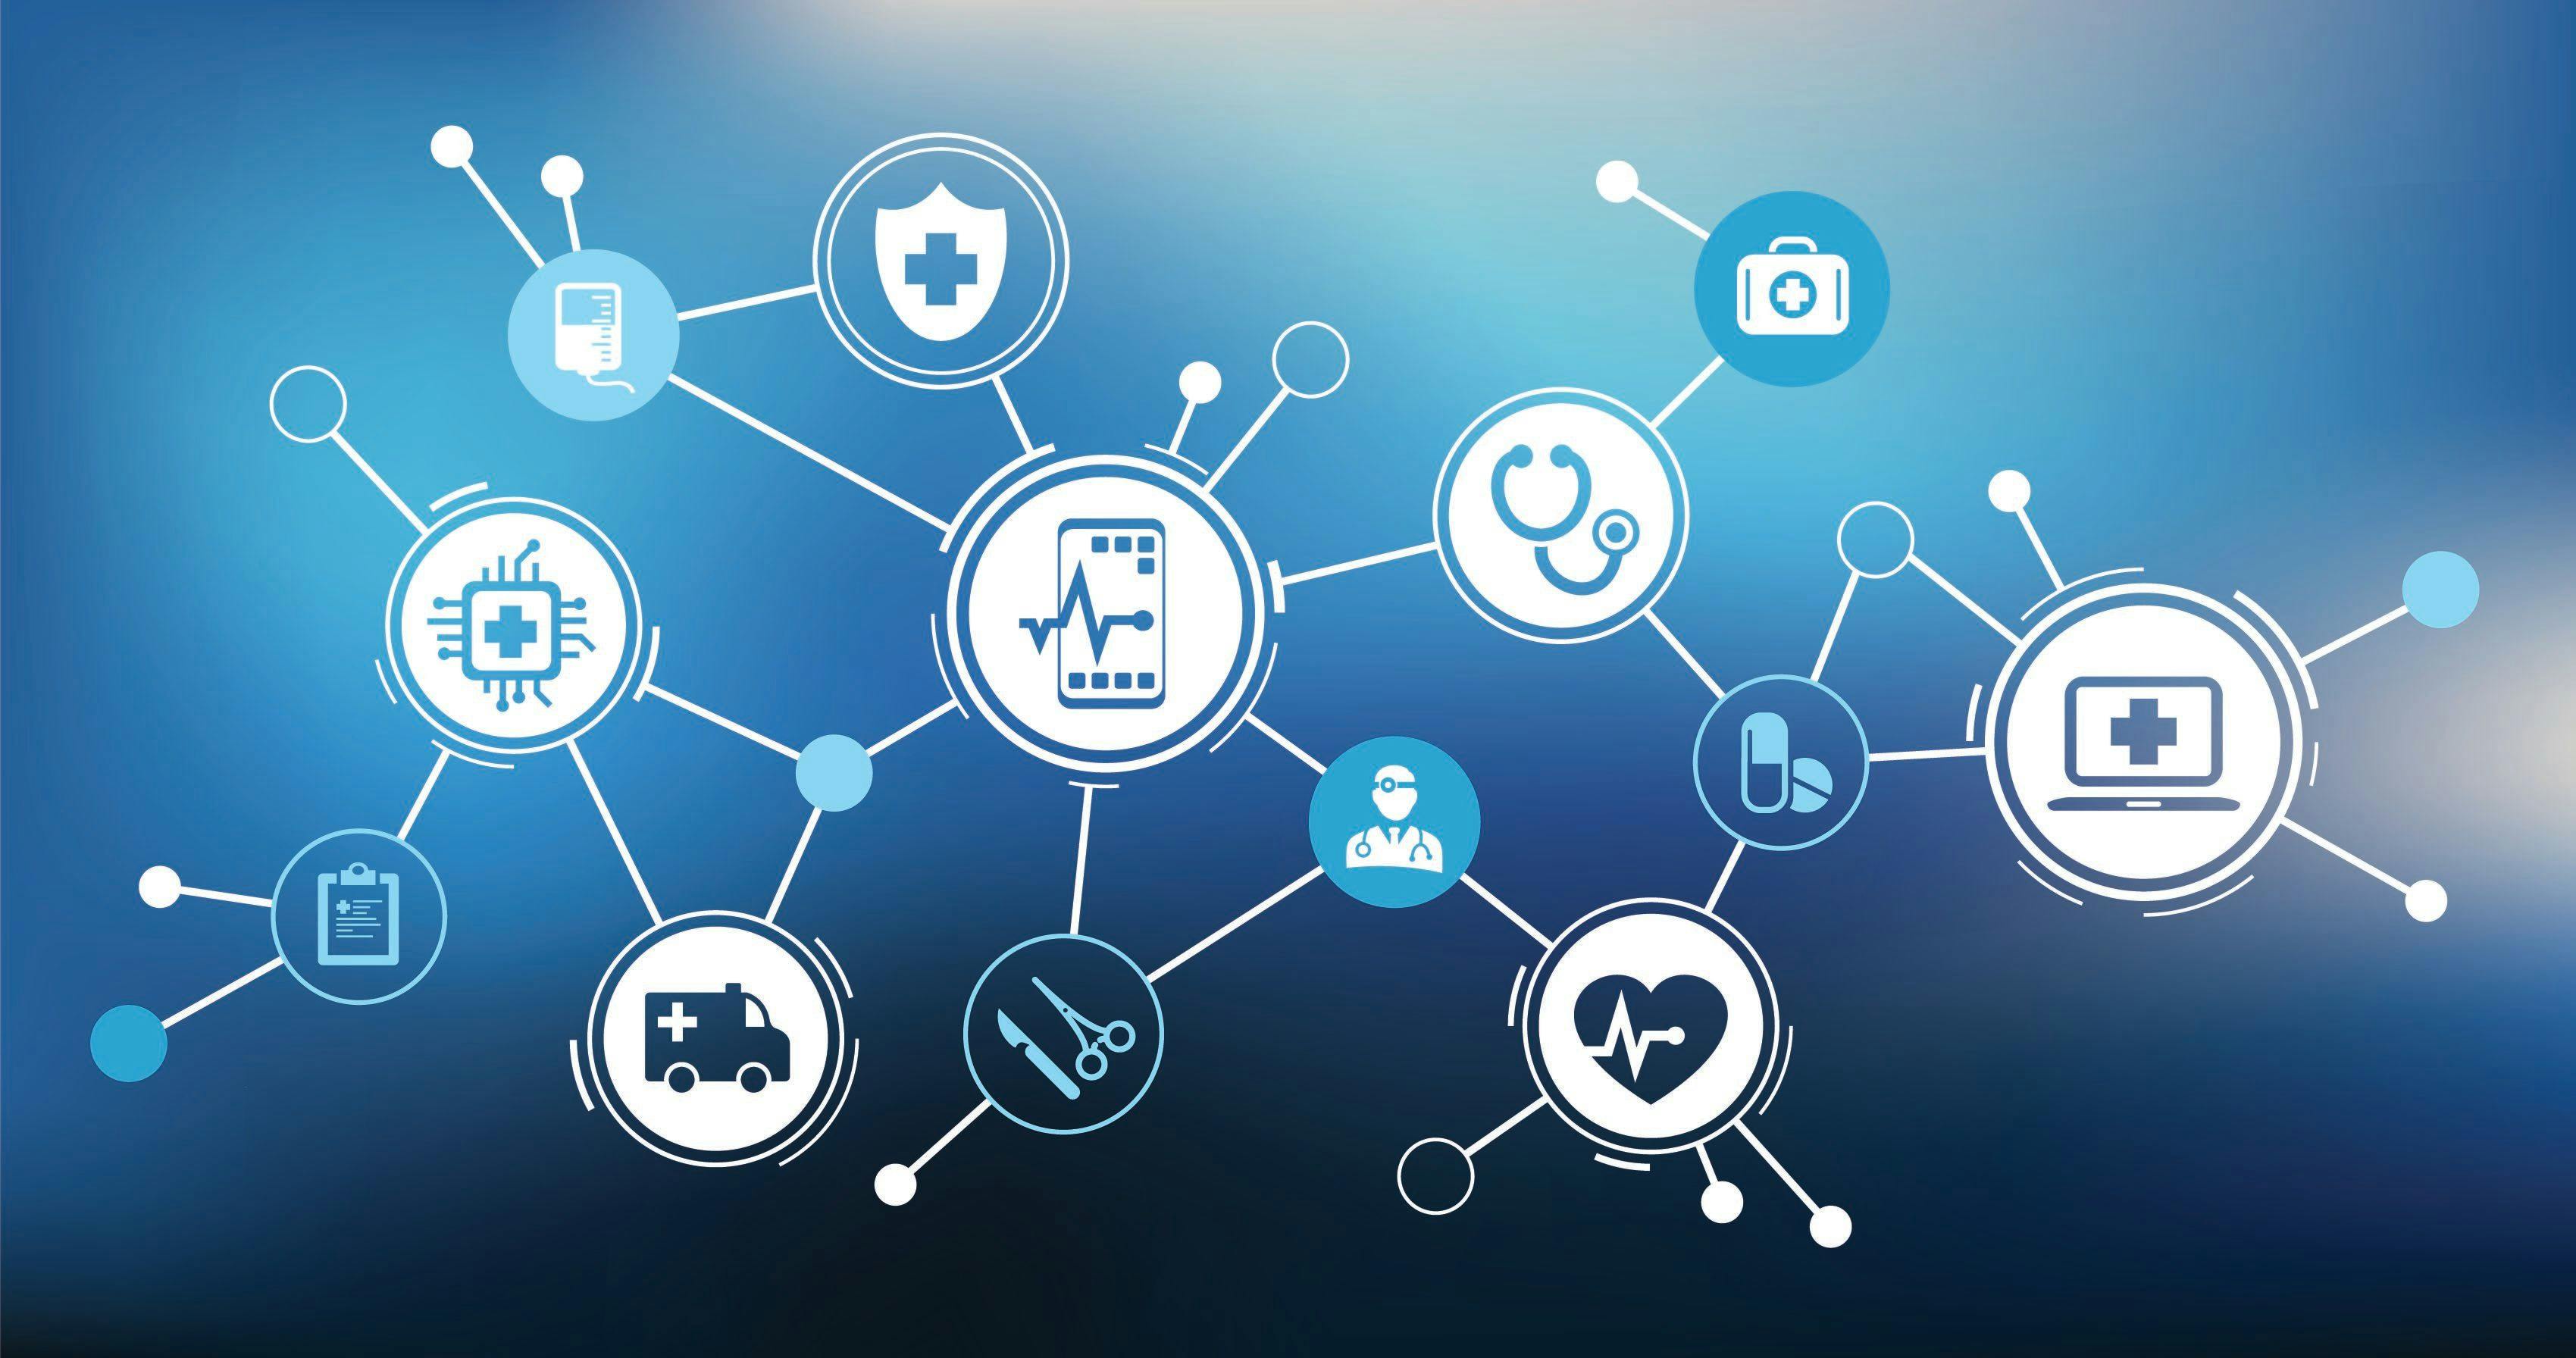 Digital healthcare tools growing in popularity, AMA survey finds